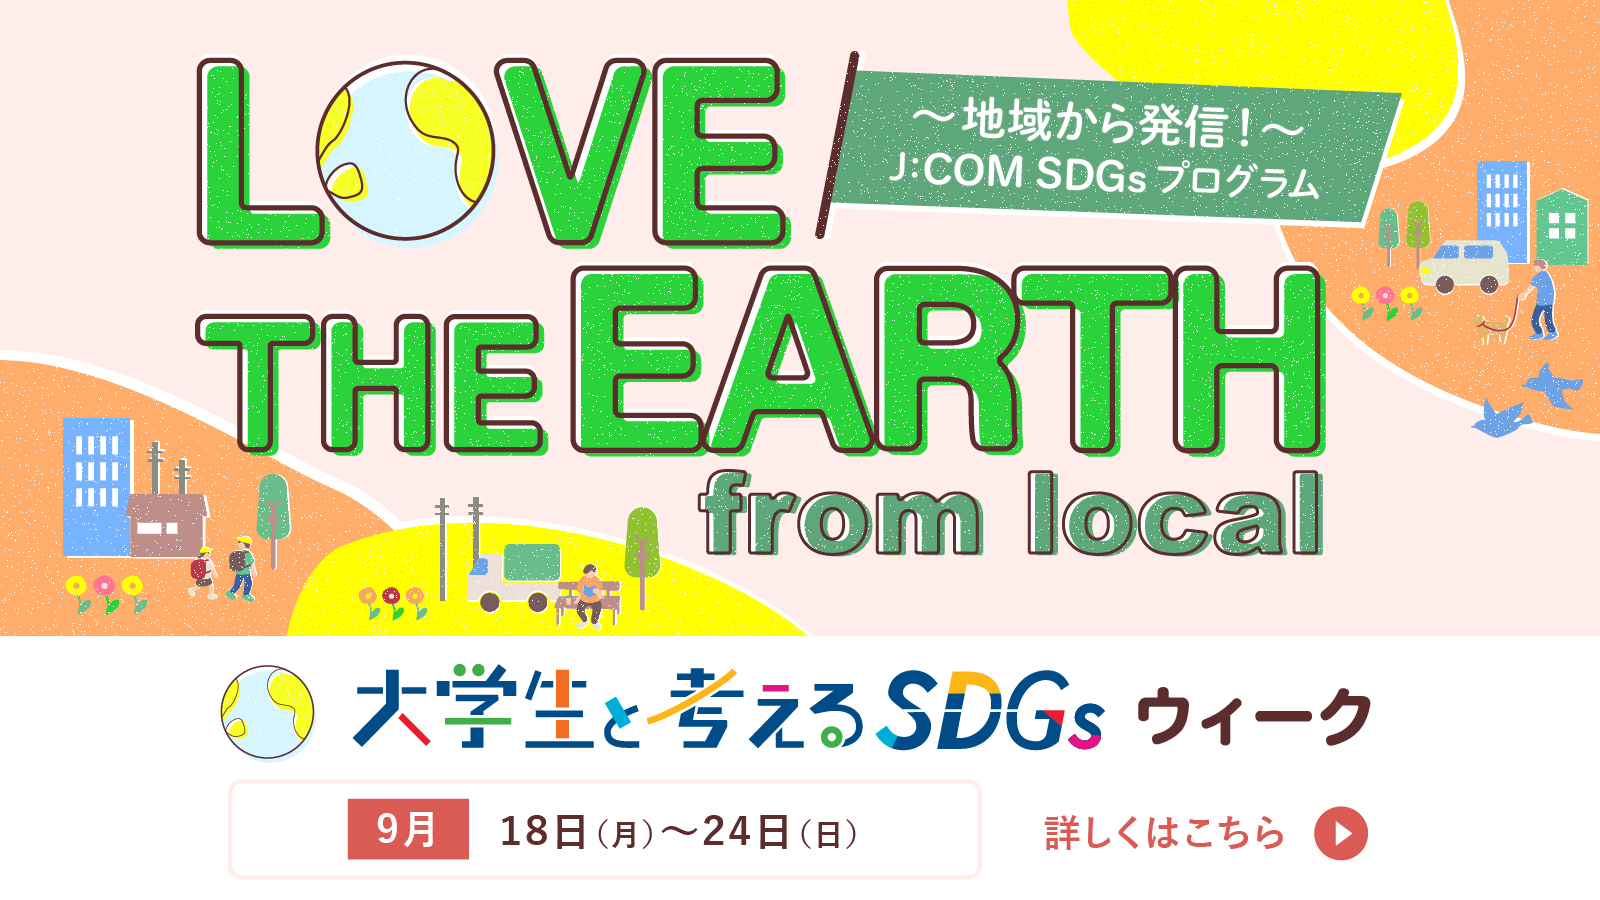 LOVE THE EARTH from local ～J:COM SDGs プログラム～